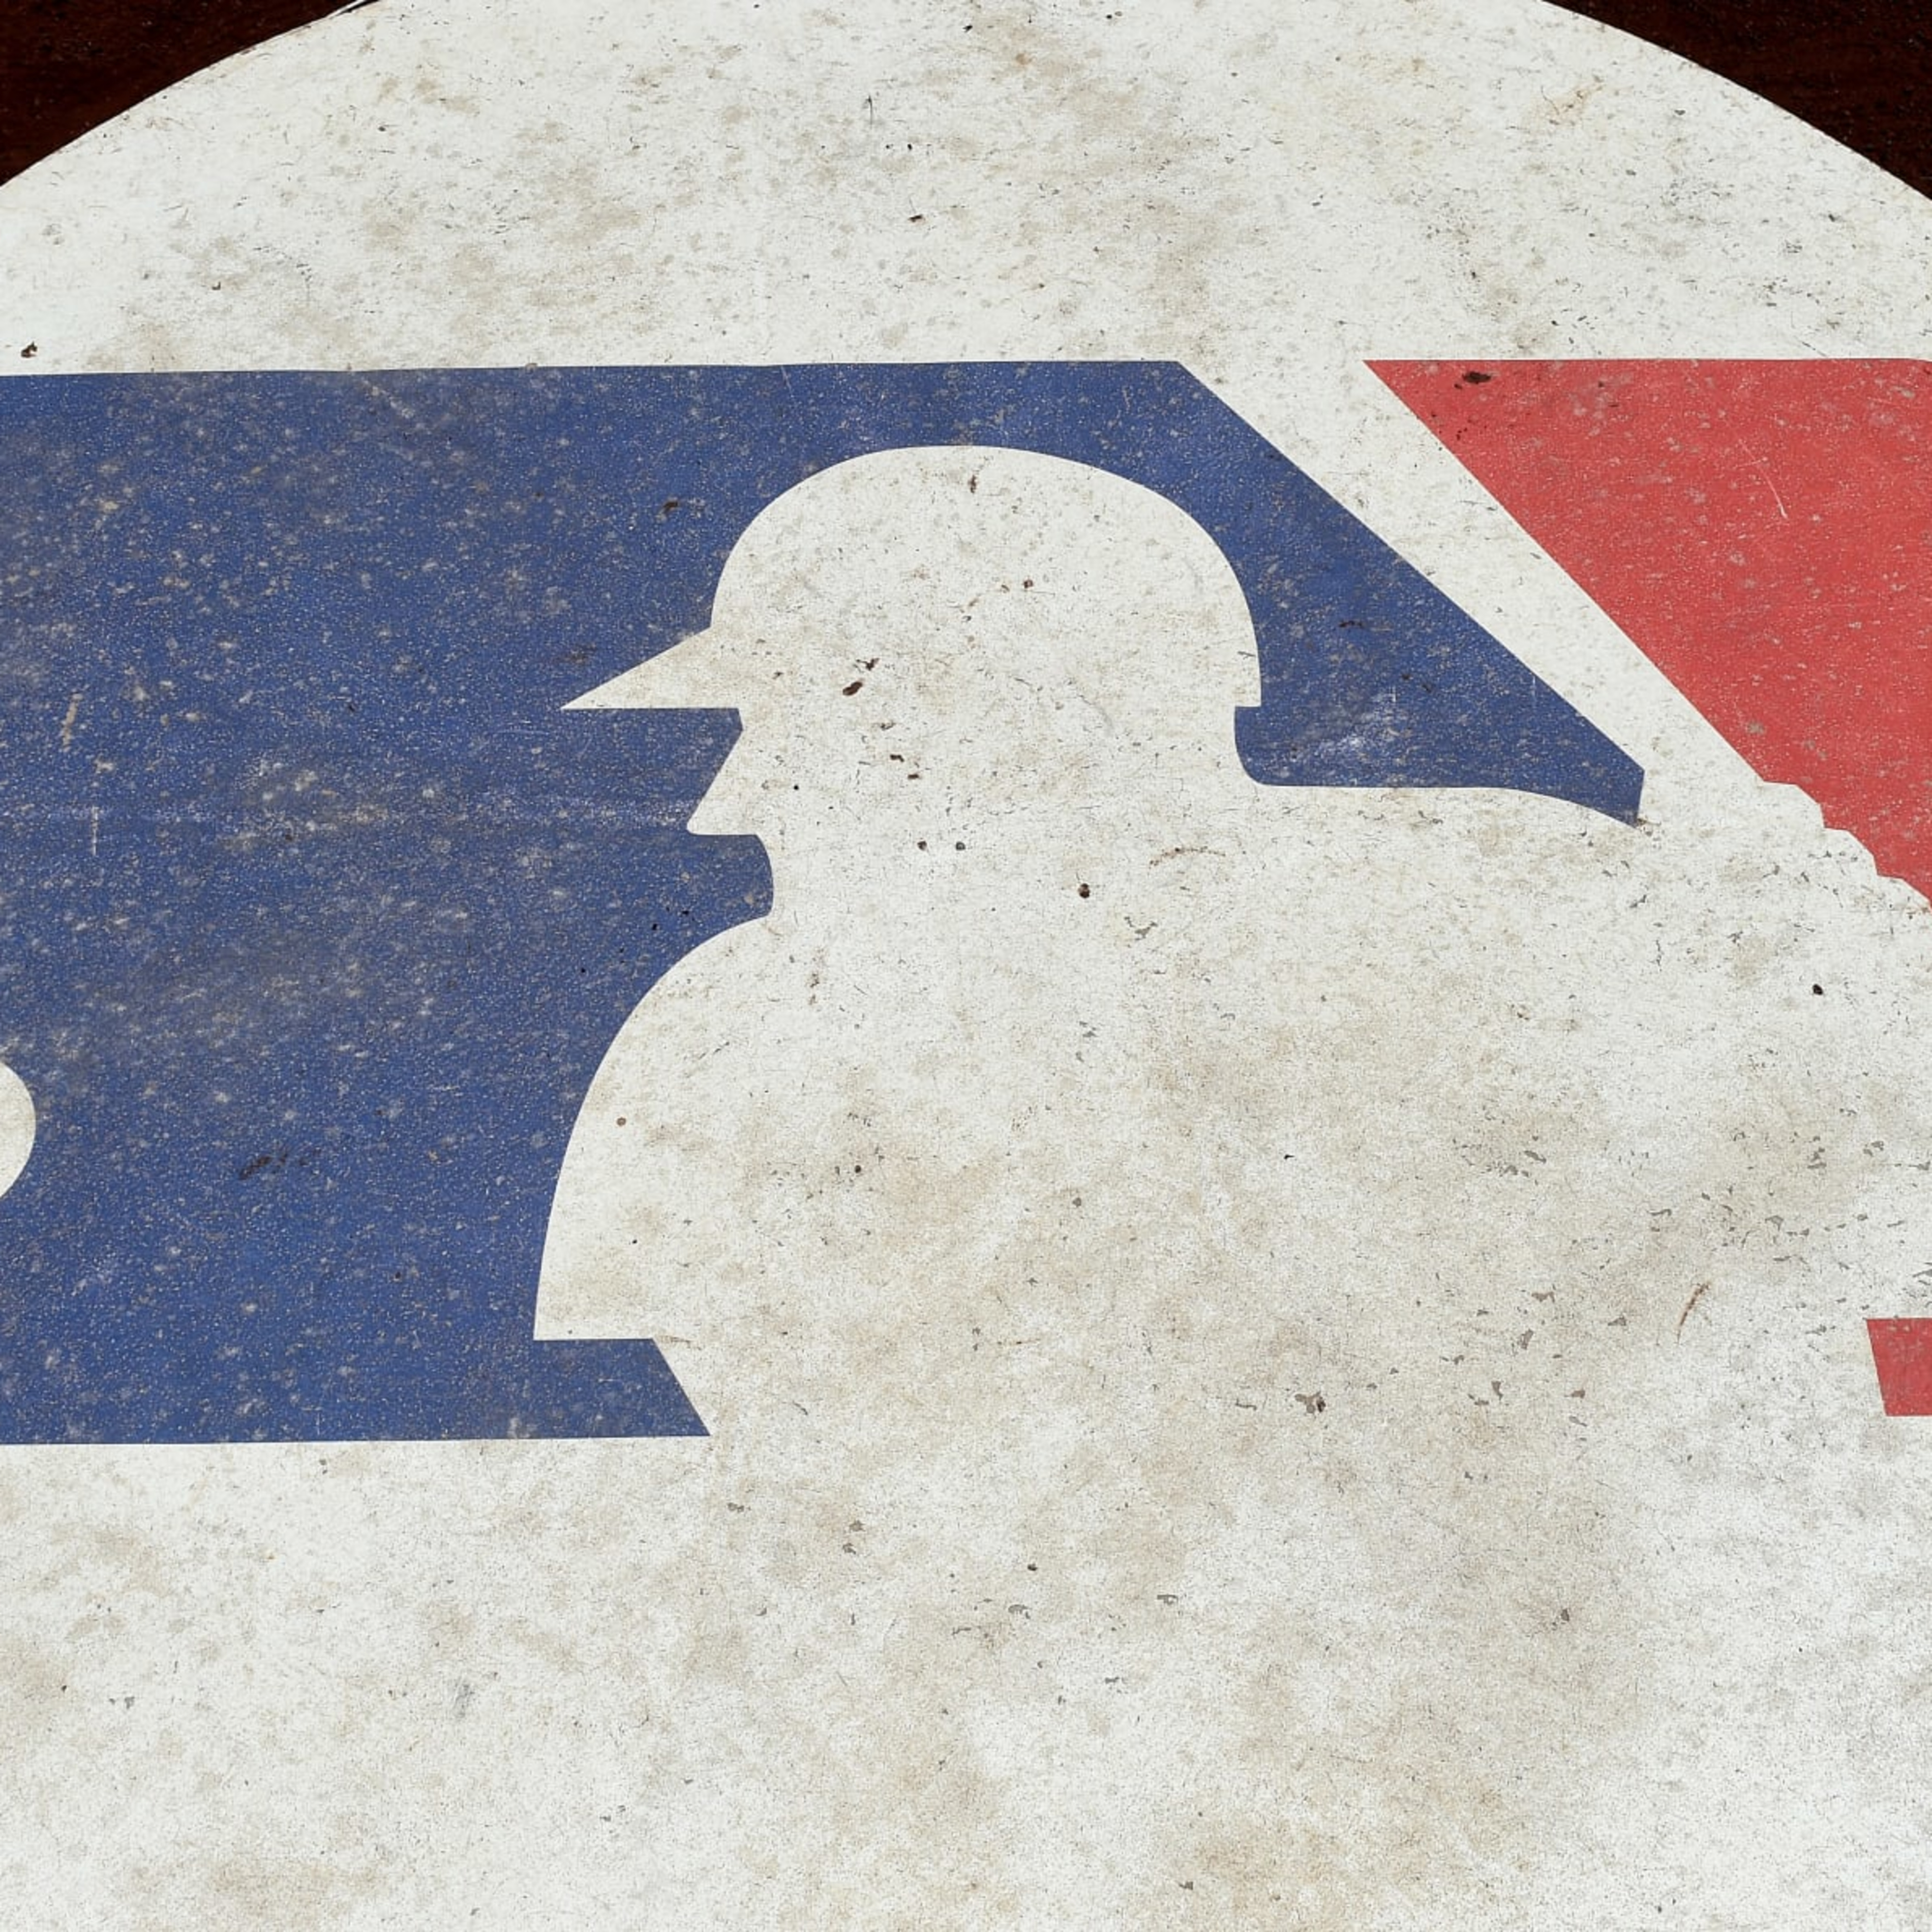 MLB to Pay $185M in Settlement with Minor League Players over Wage Violations thumbnail